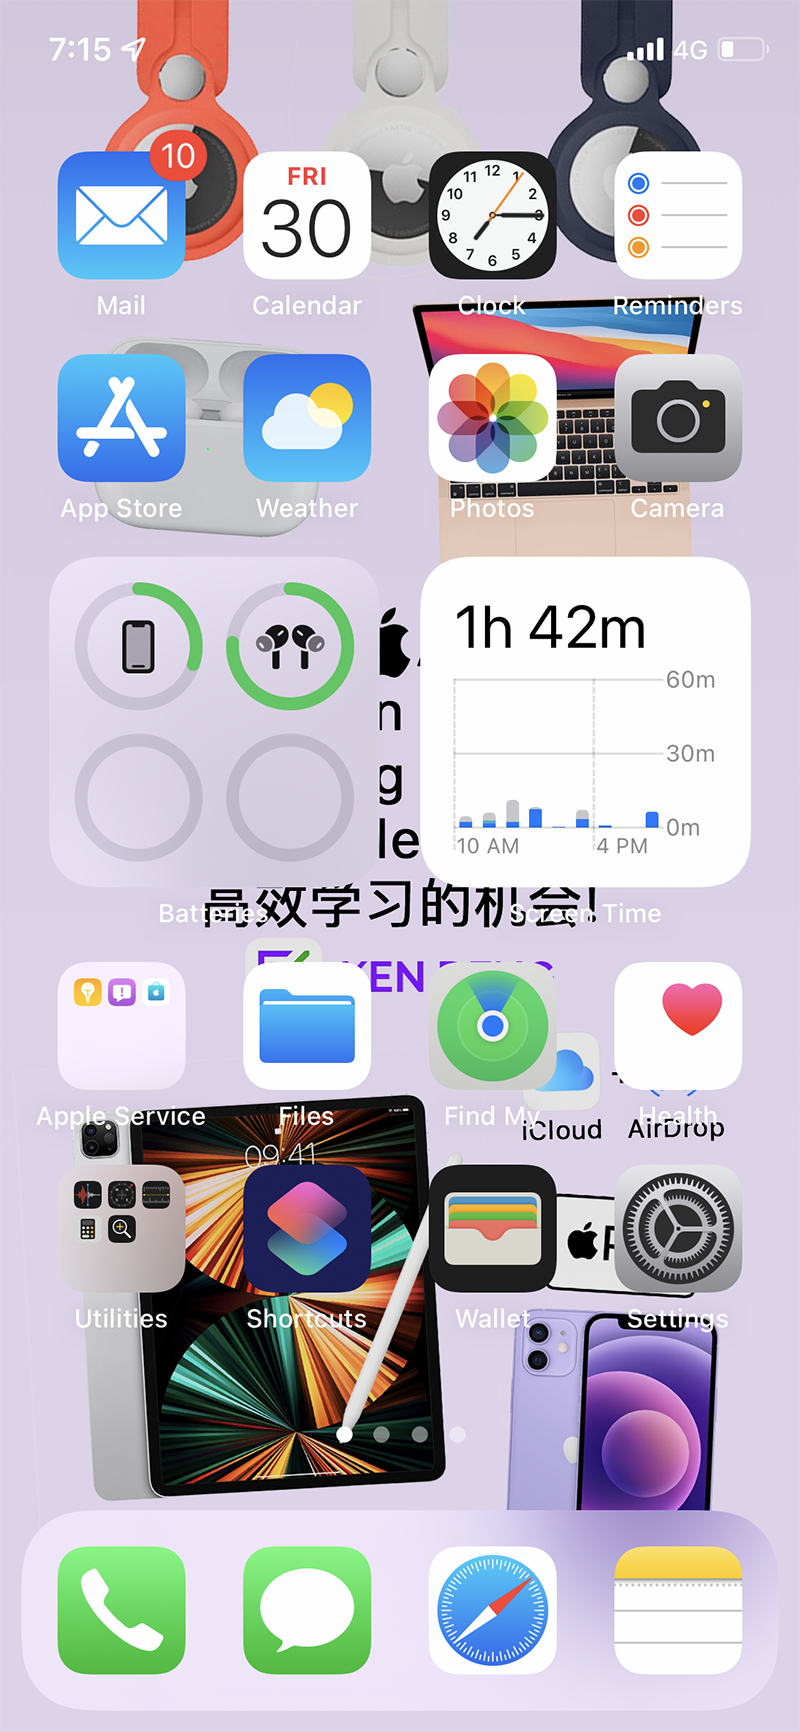 Productive Apps and Layout on iPhone Screen 1